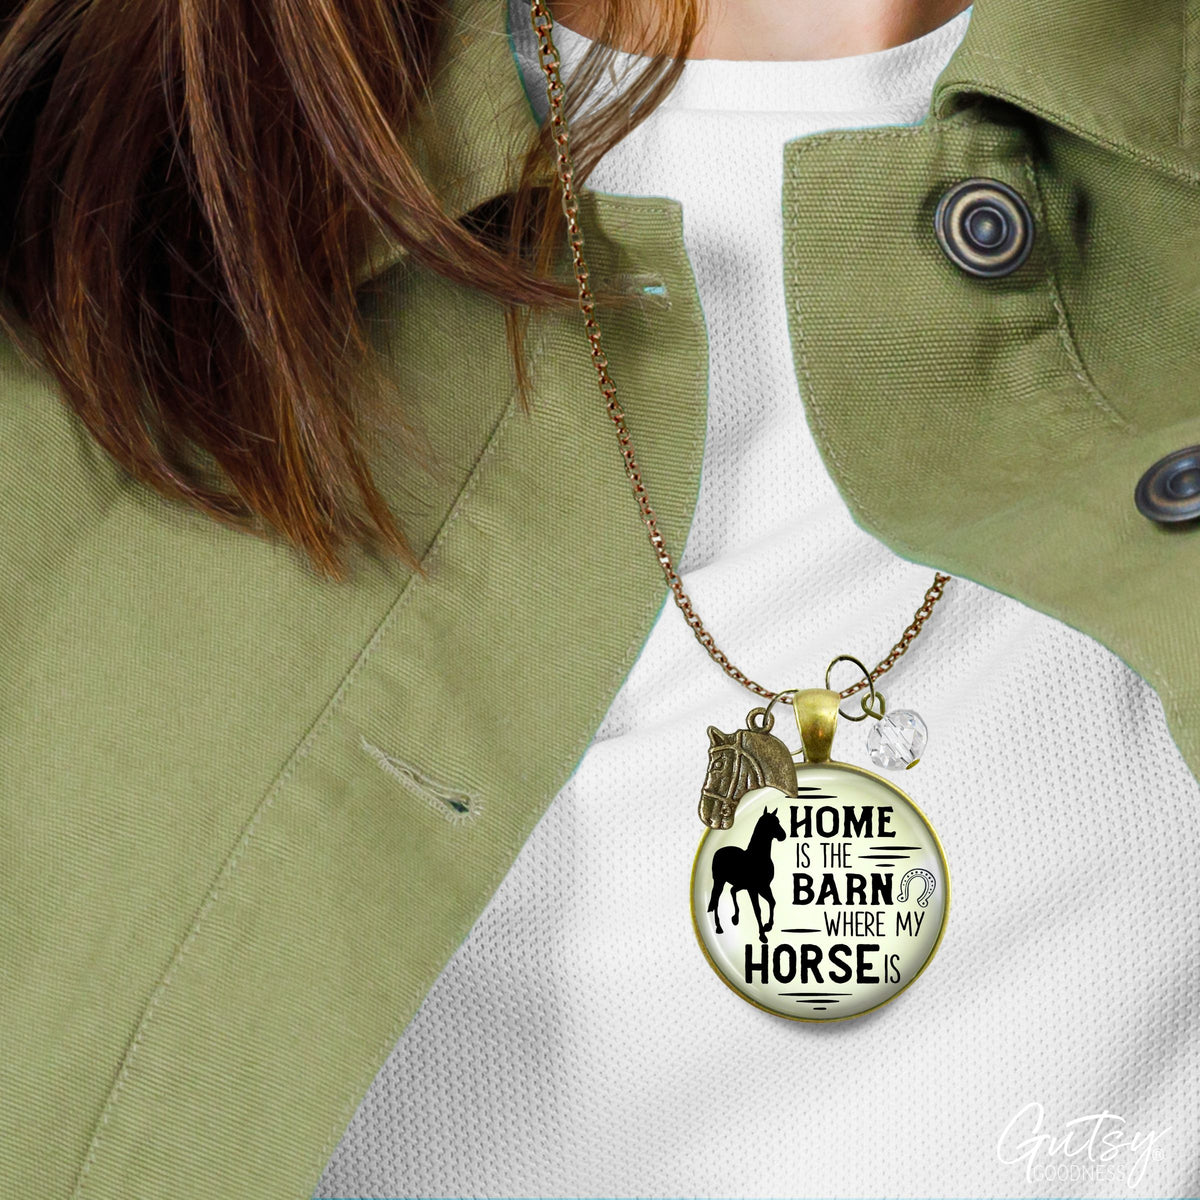 Handmade Gutsy Goodness Jewelry Home Is The Barn Where My Horse Is Necklace Western Boho Country Girl Charm Jewelry & Message Card